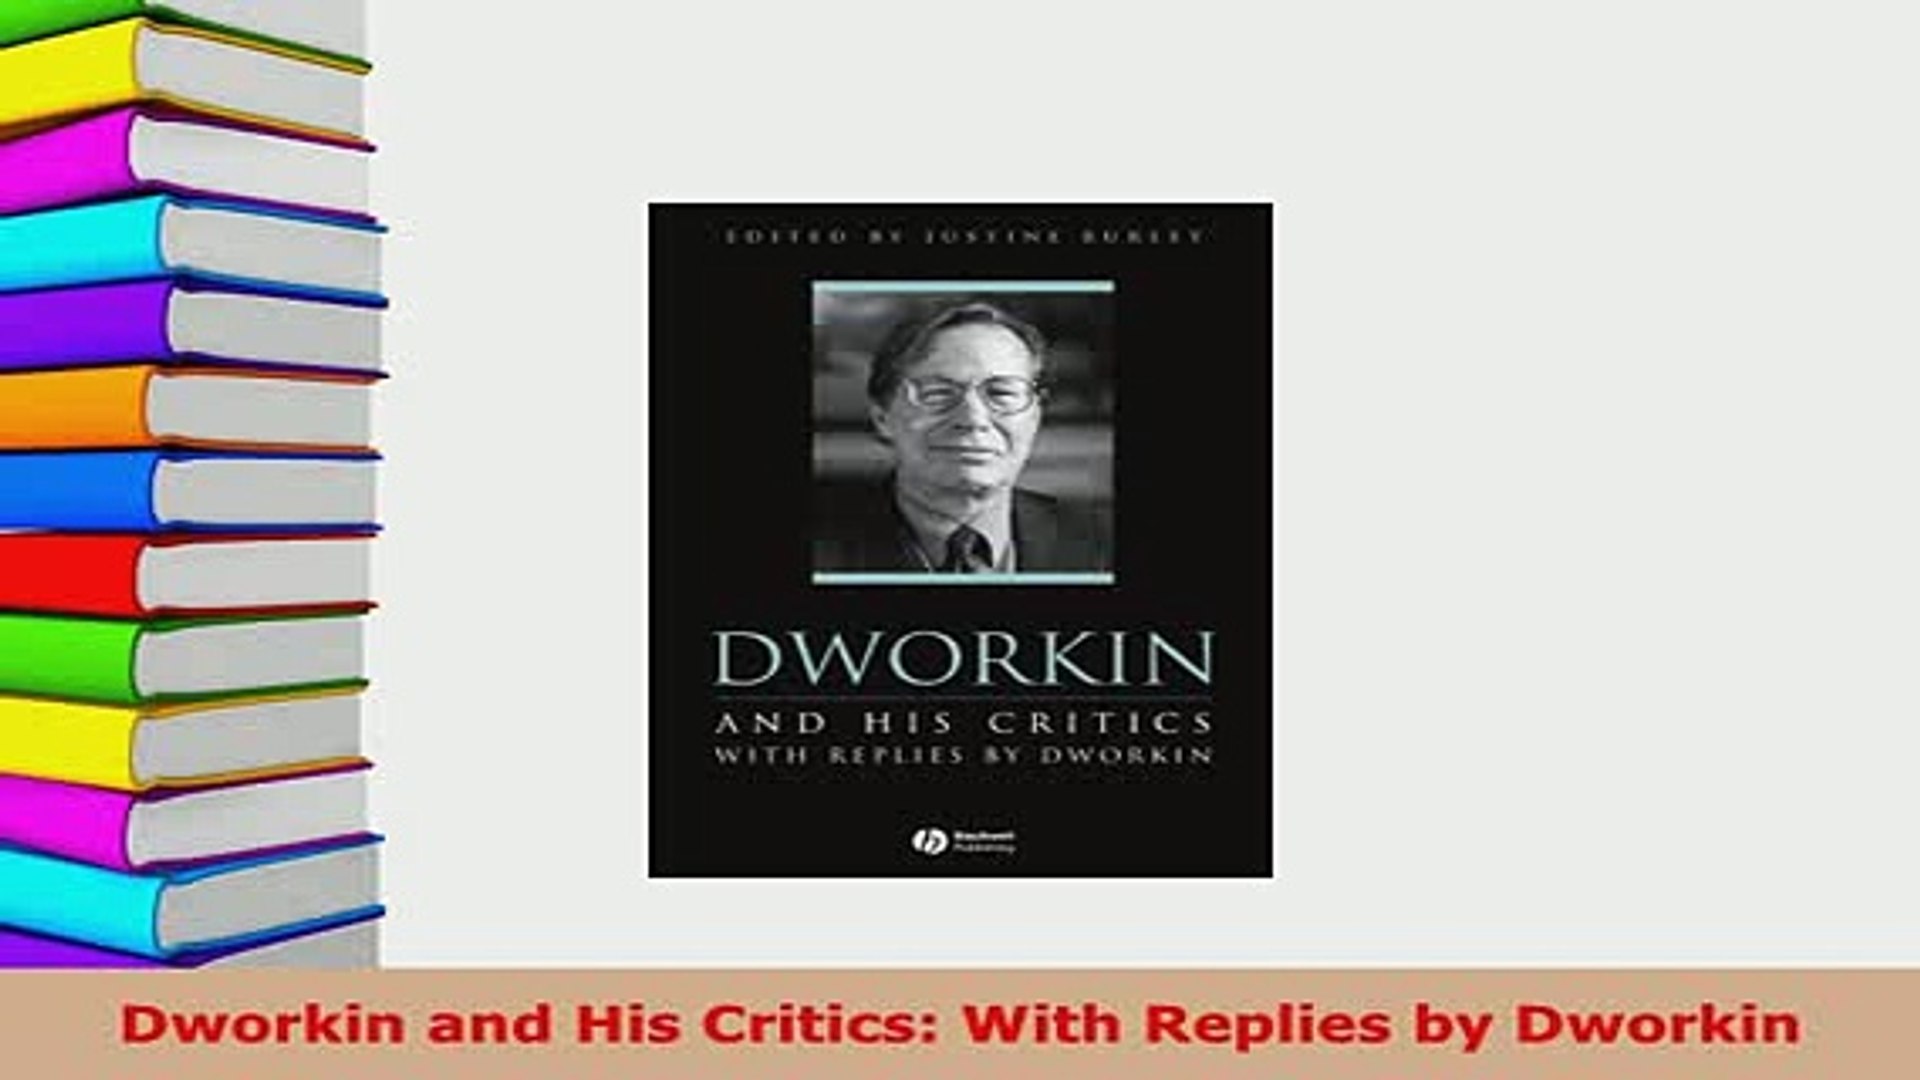 With Replies by Dworkin Dworkin and His Critics